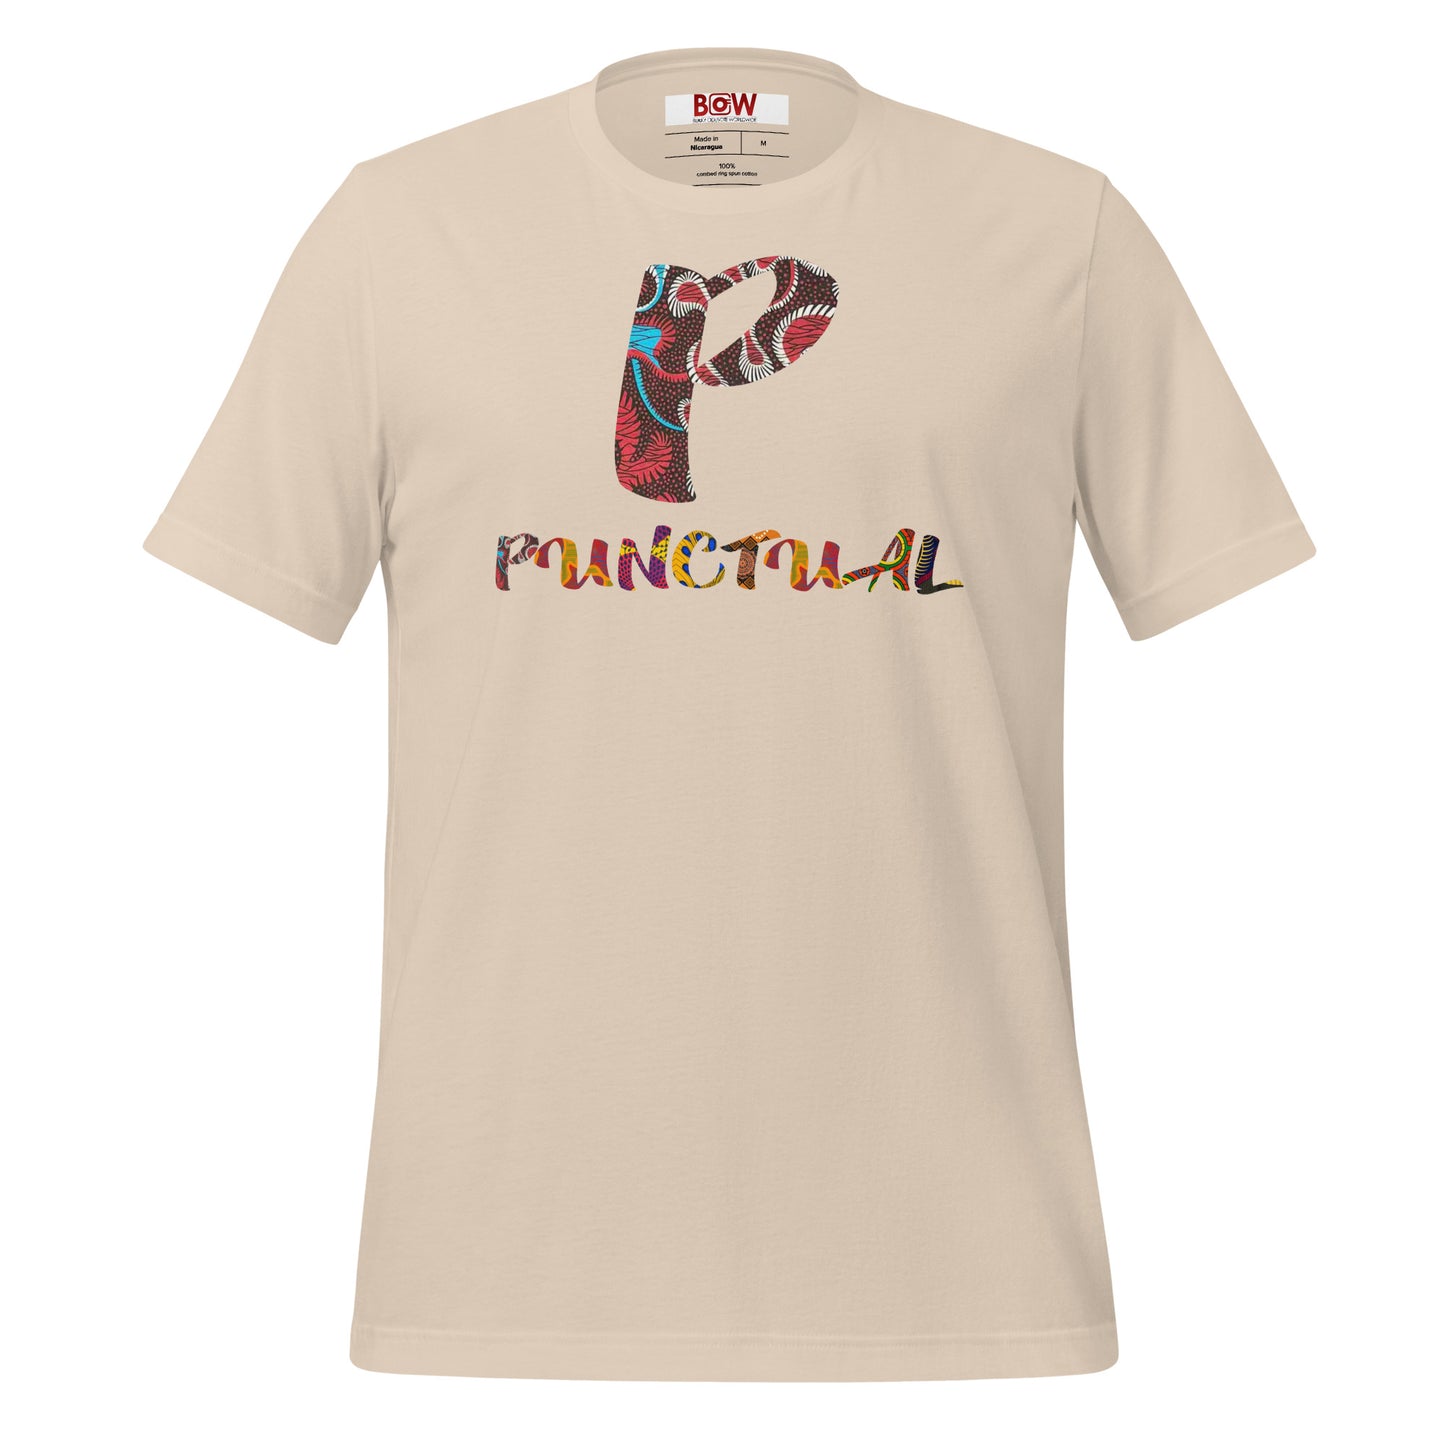 P For Punctual Unisex Afro Graphic T-Shirt